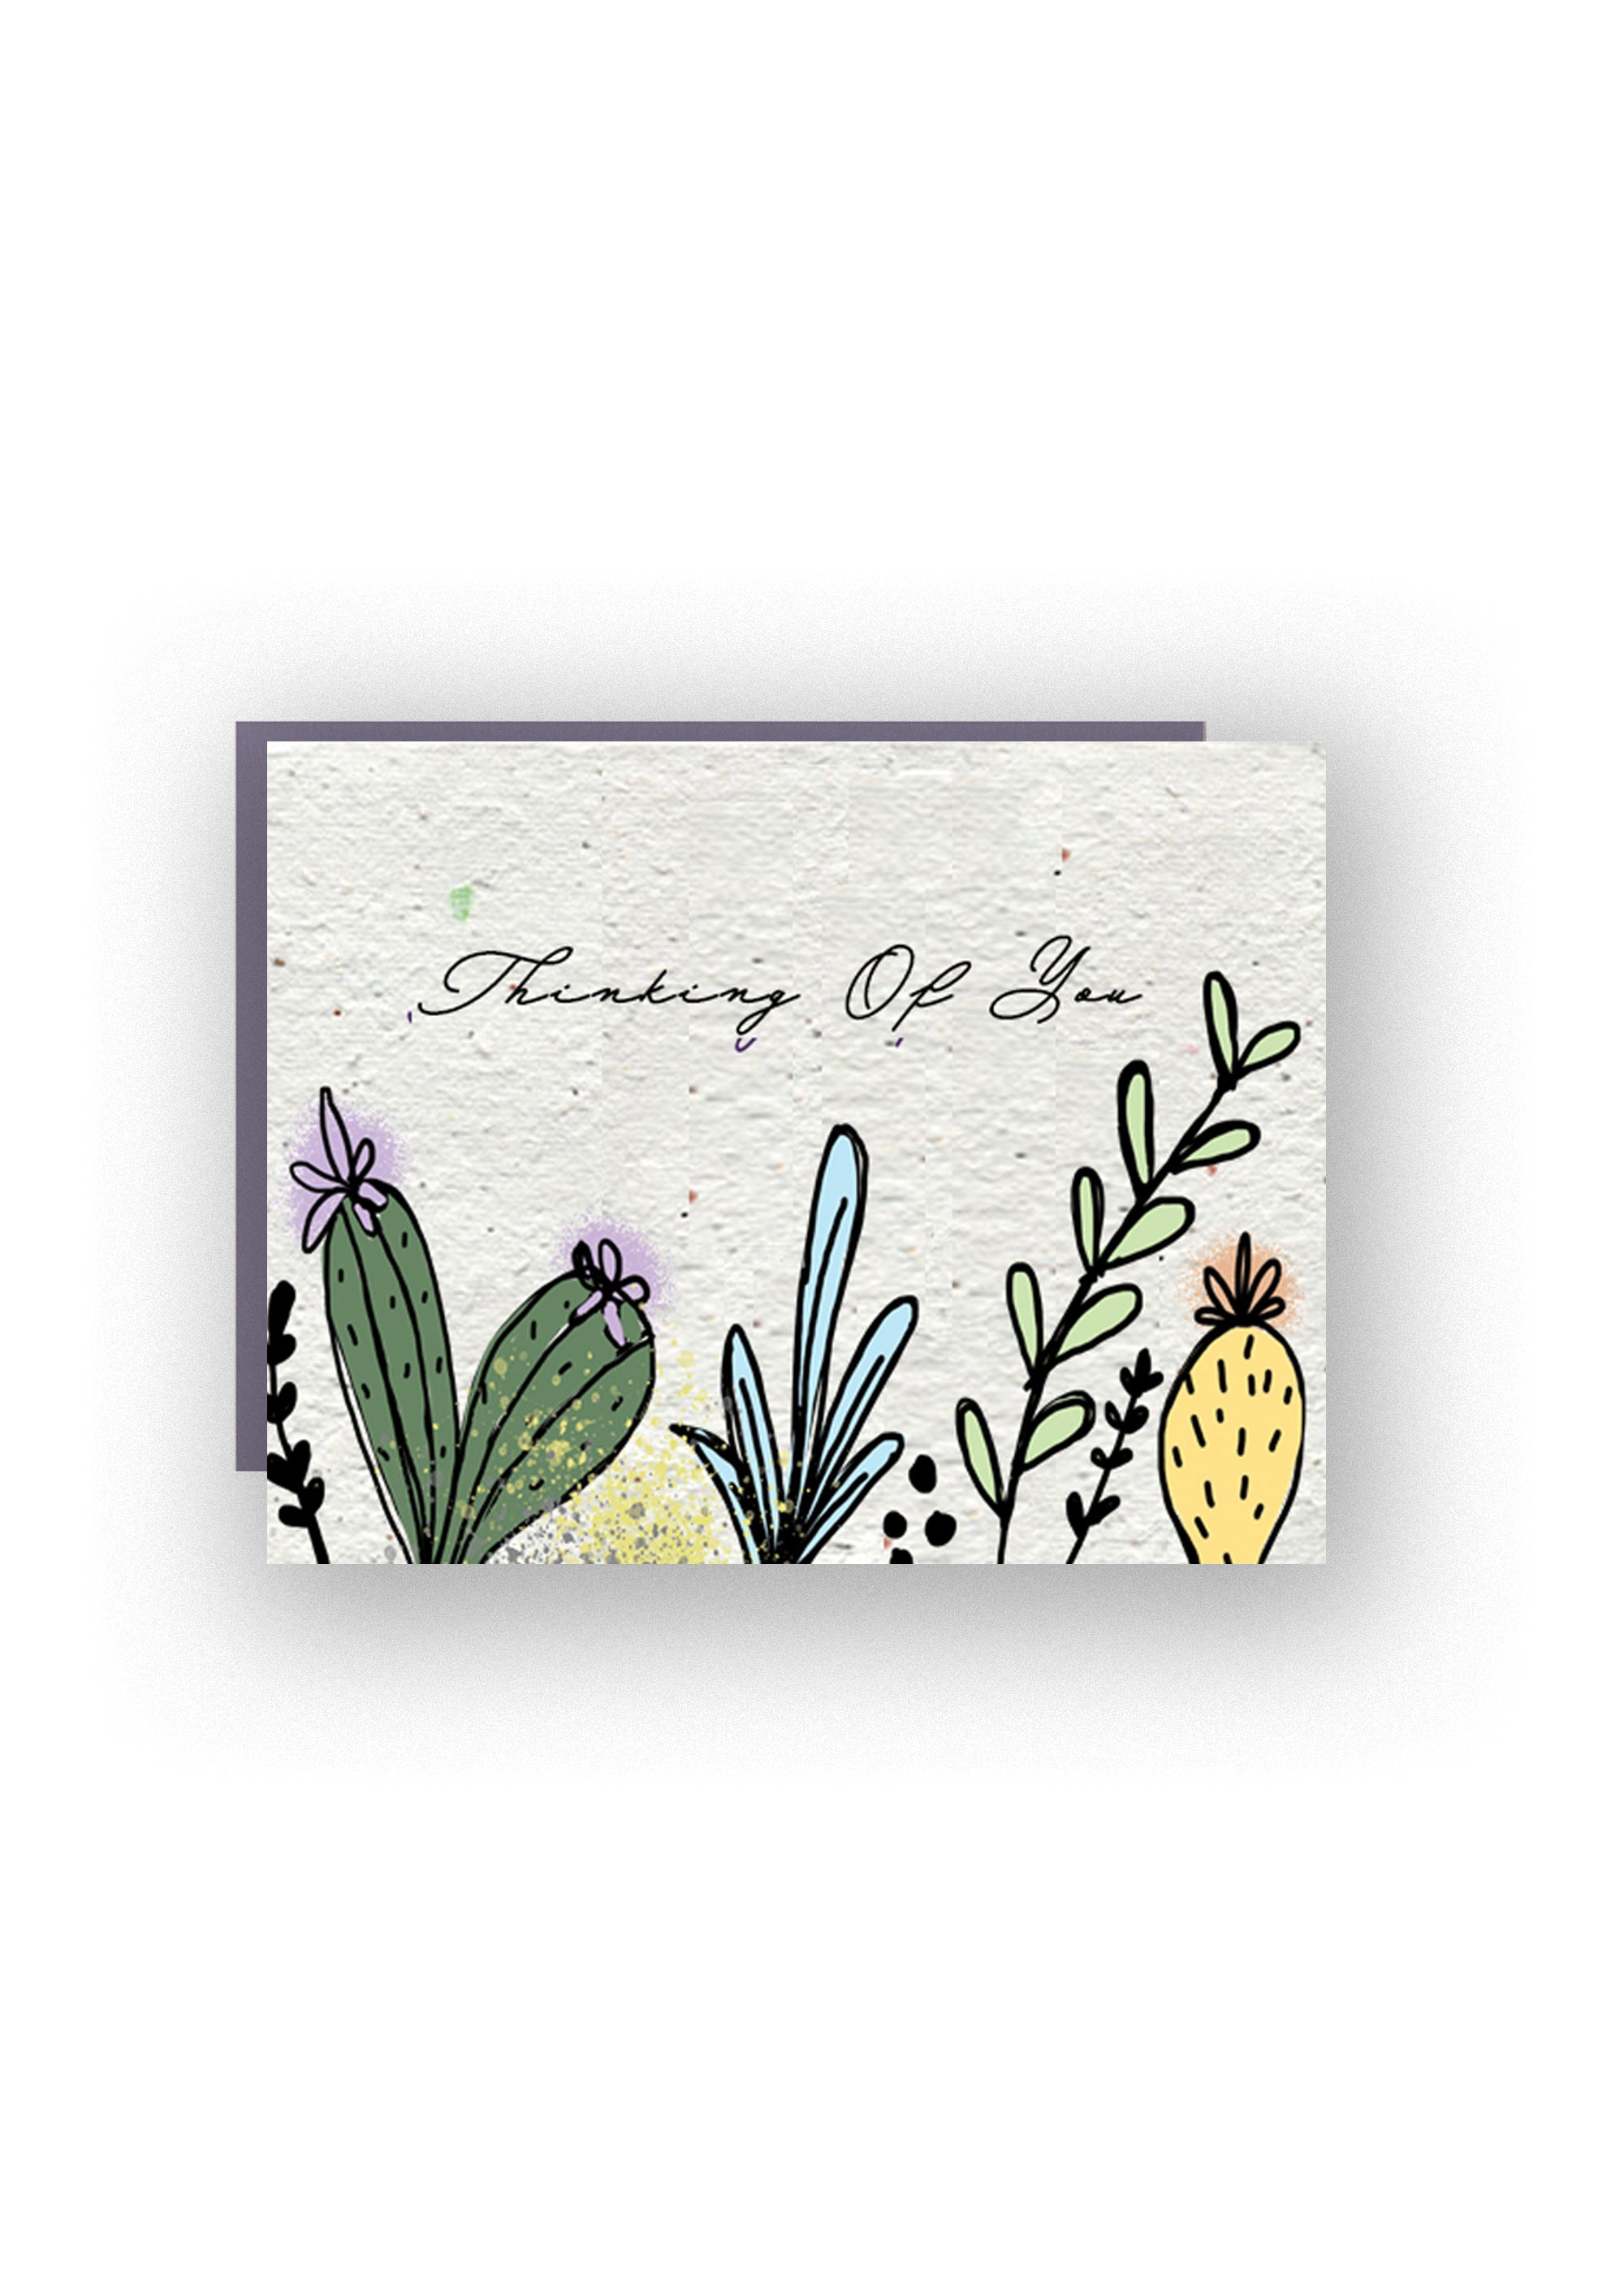 "Thinking of you" Desert Theme Wildflower Seed Paper Card